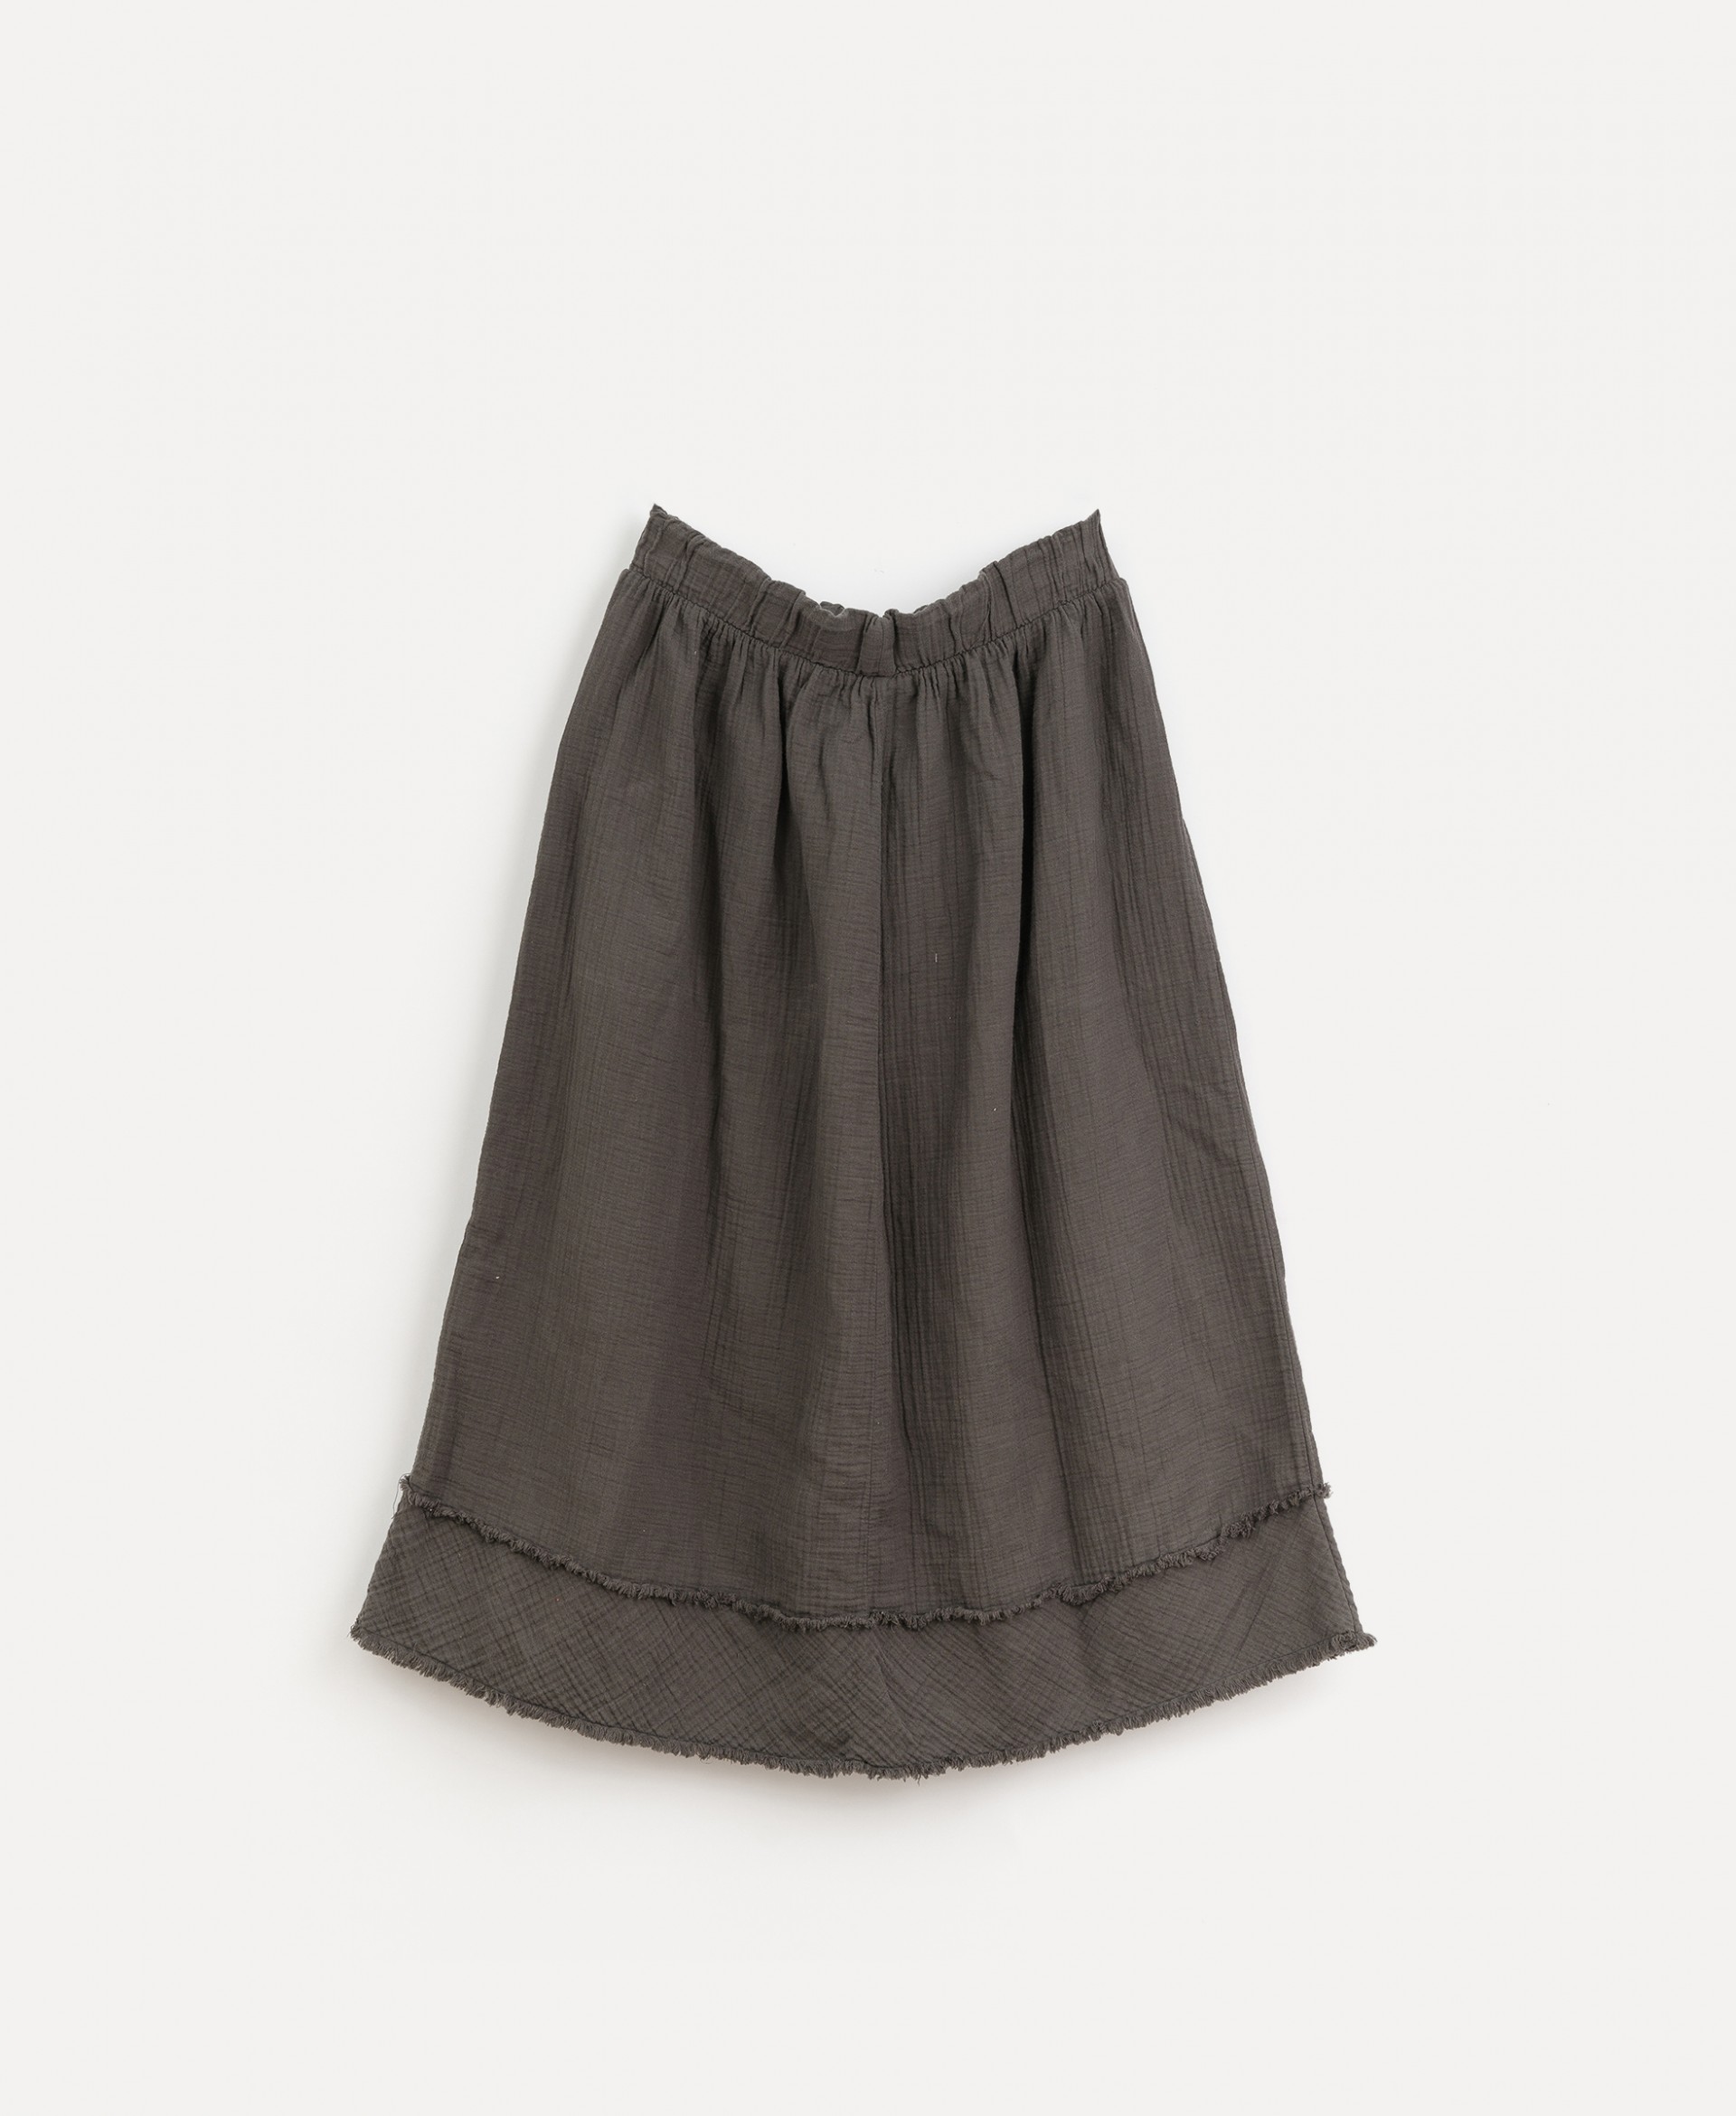 Skirt with pockets | Culinary